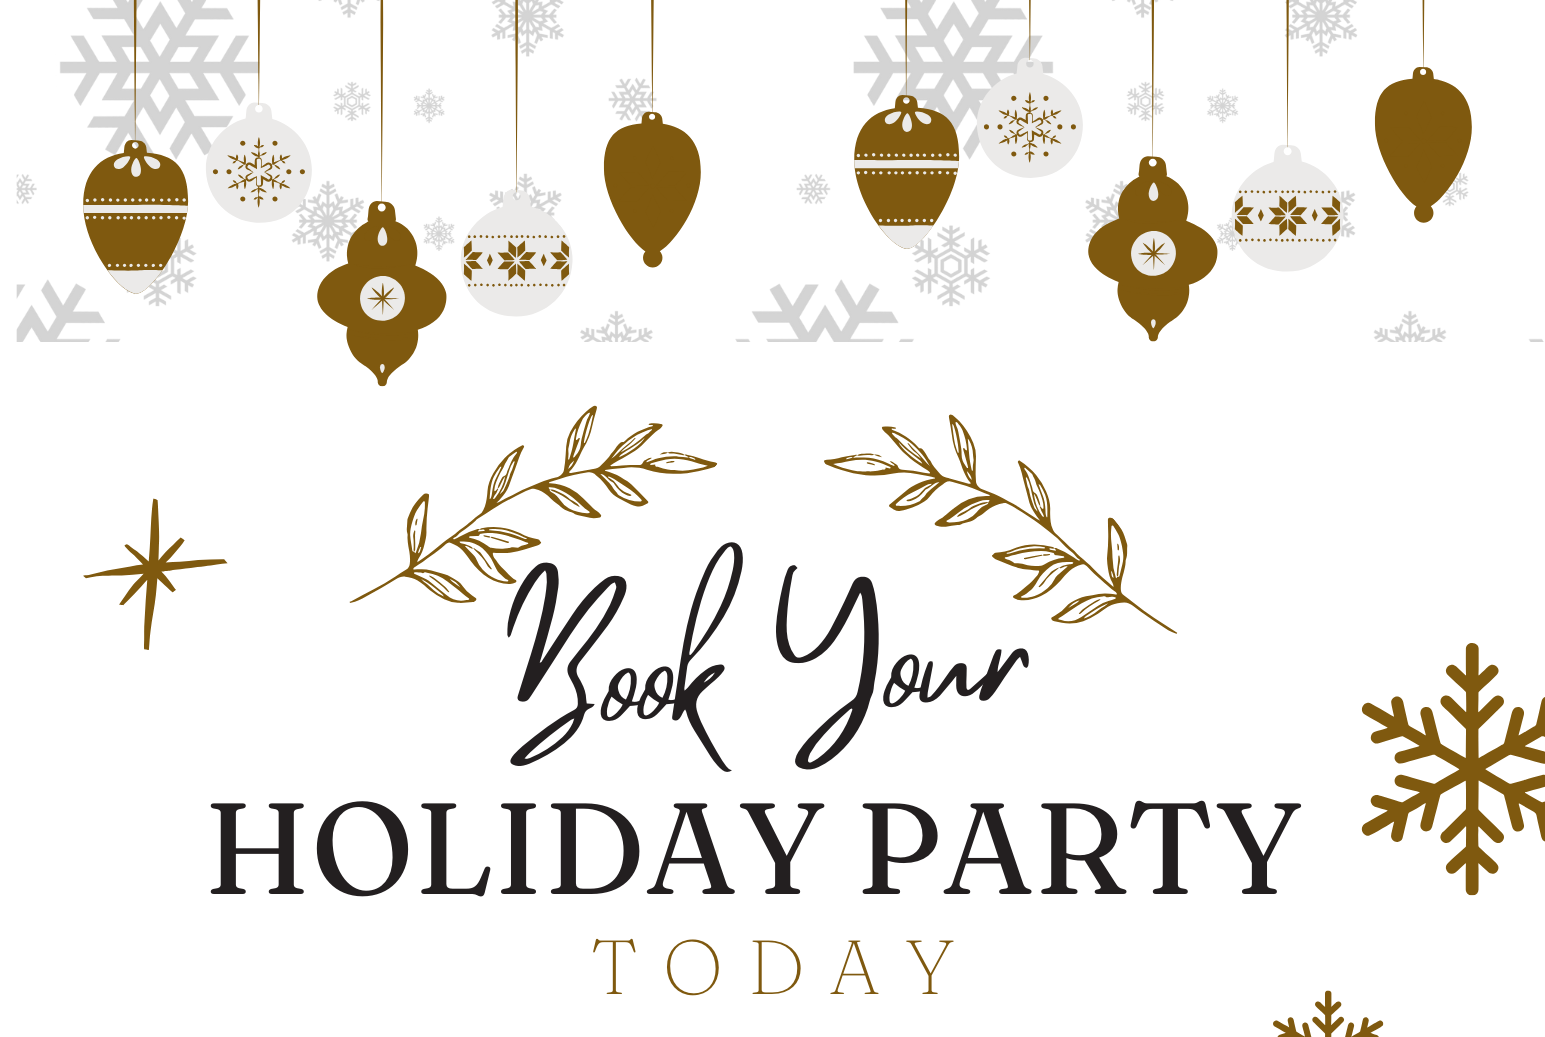 Holiday Party Flyer